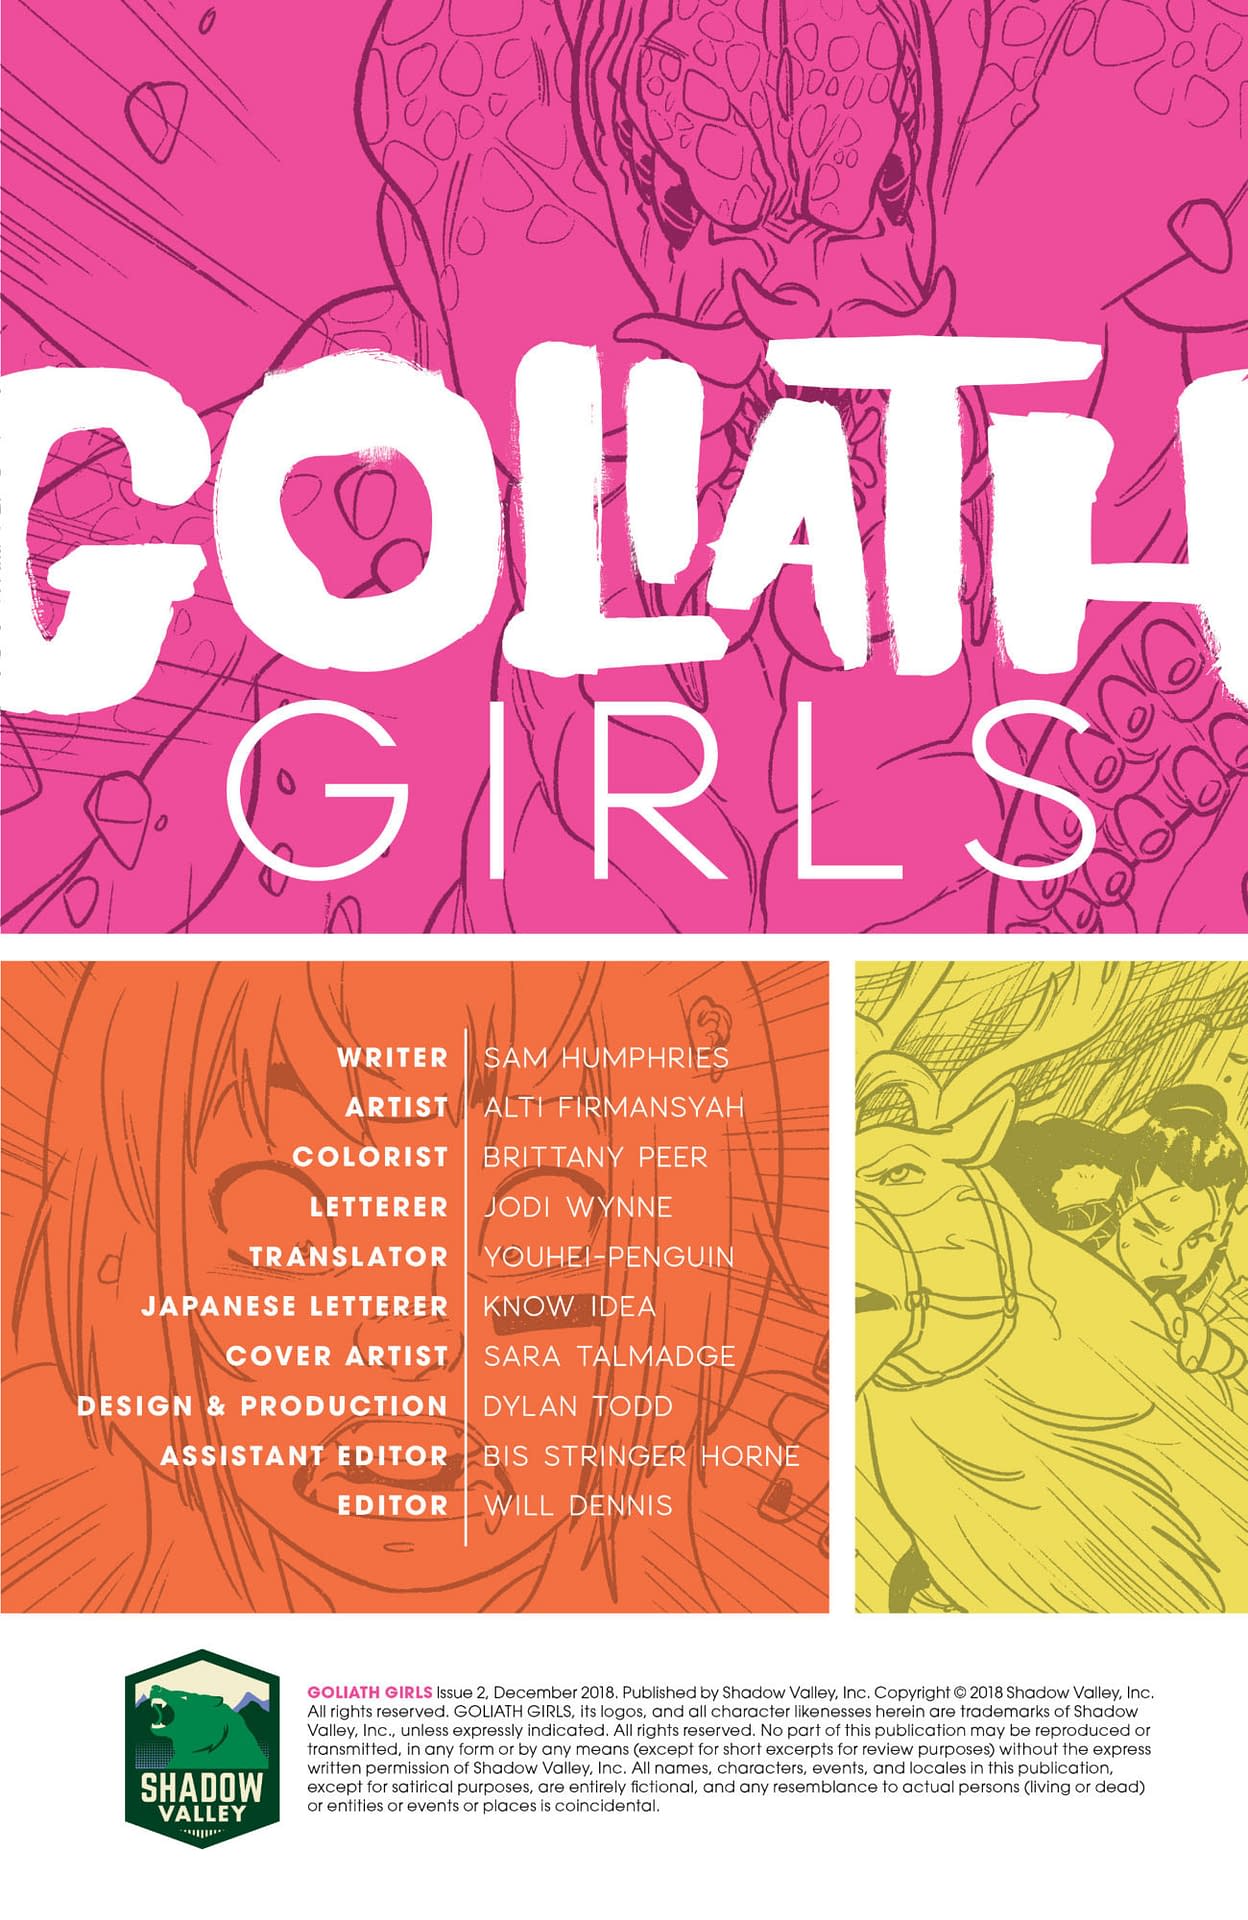 ComiXology Goes All in on Goliath Girls with Special Edition, Sam Humphries Sale